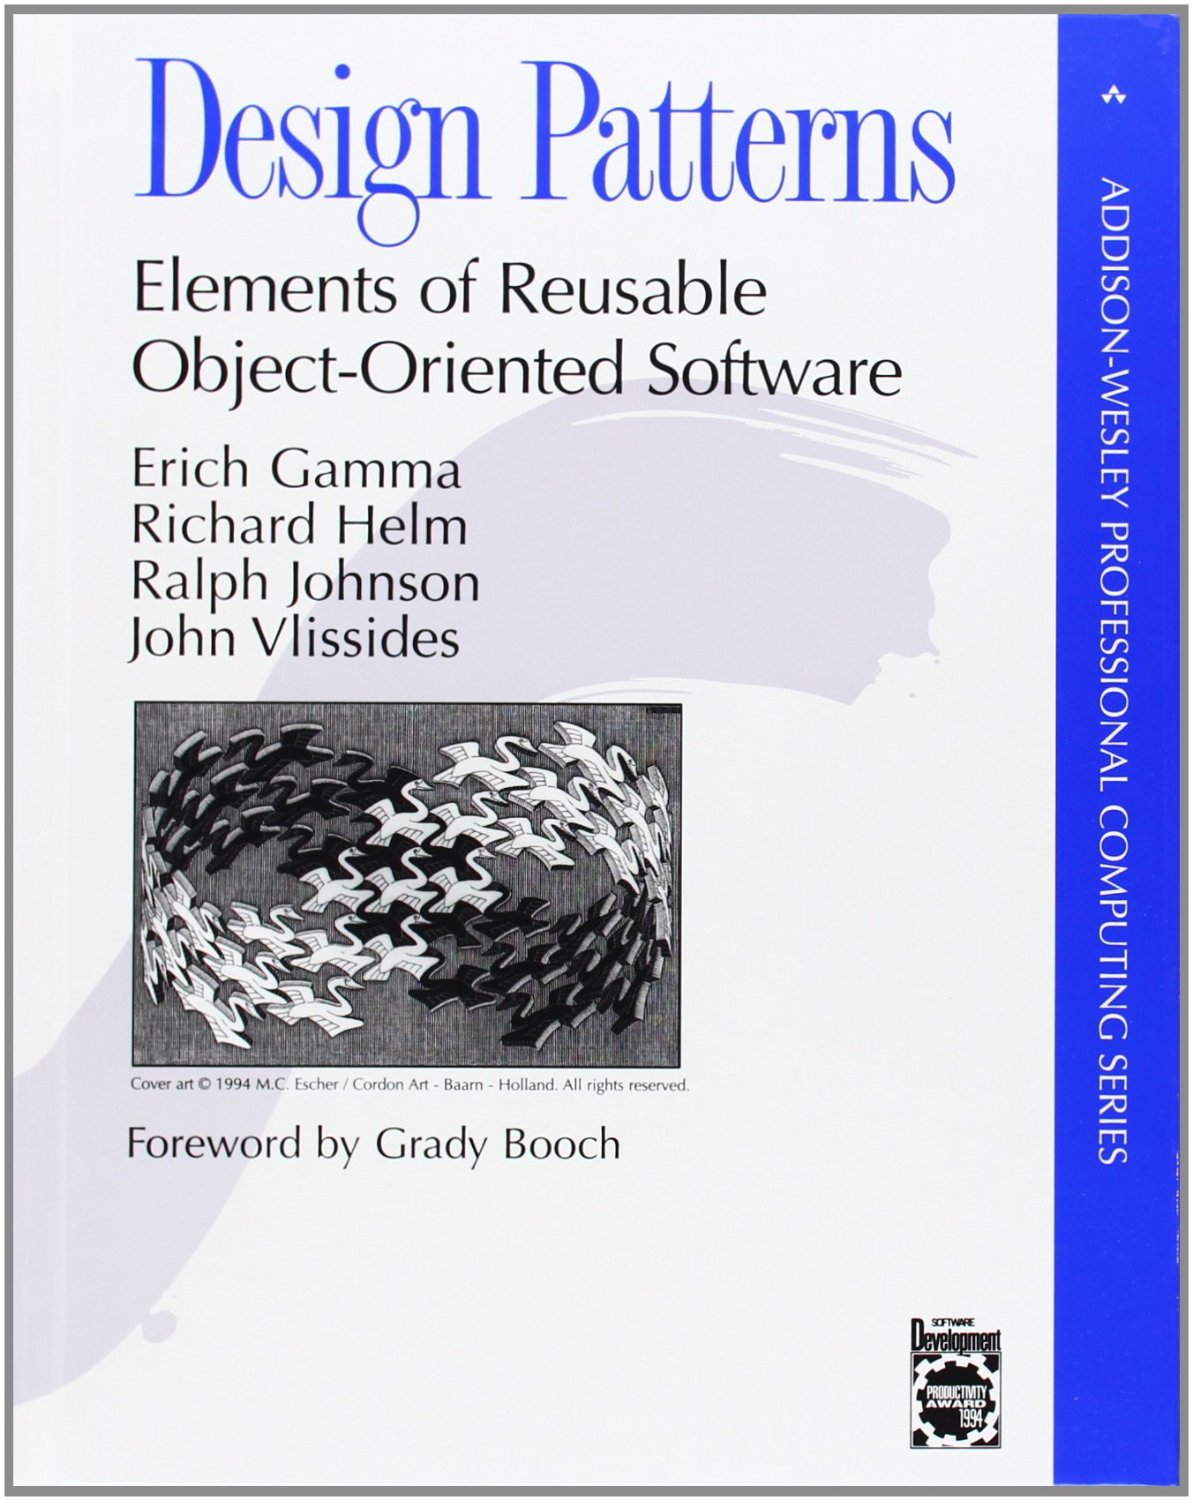 Design Patterns, by Gamma, Helm, Johnson and Vlissides